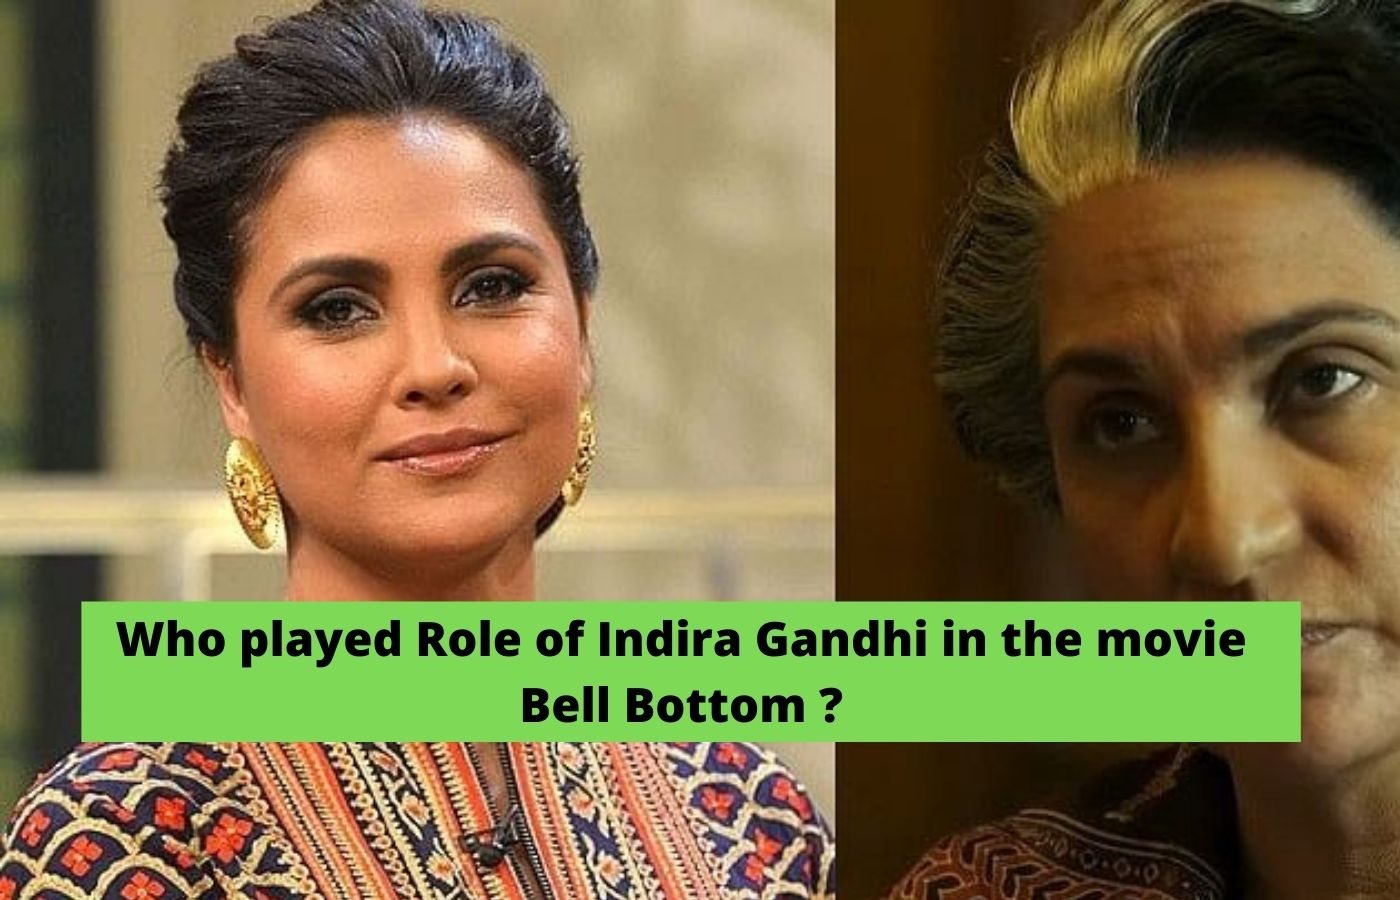 Who played Role of Indira Gandhi in the movie Bell Bottom